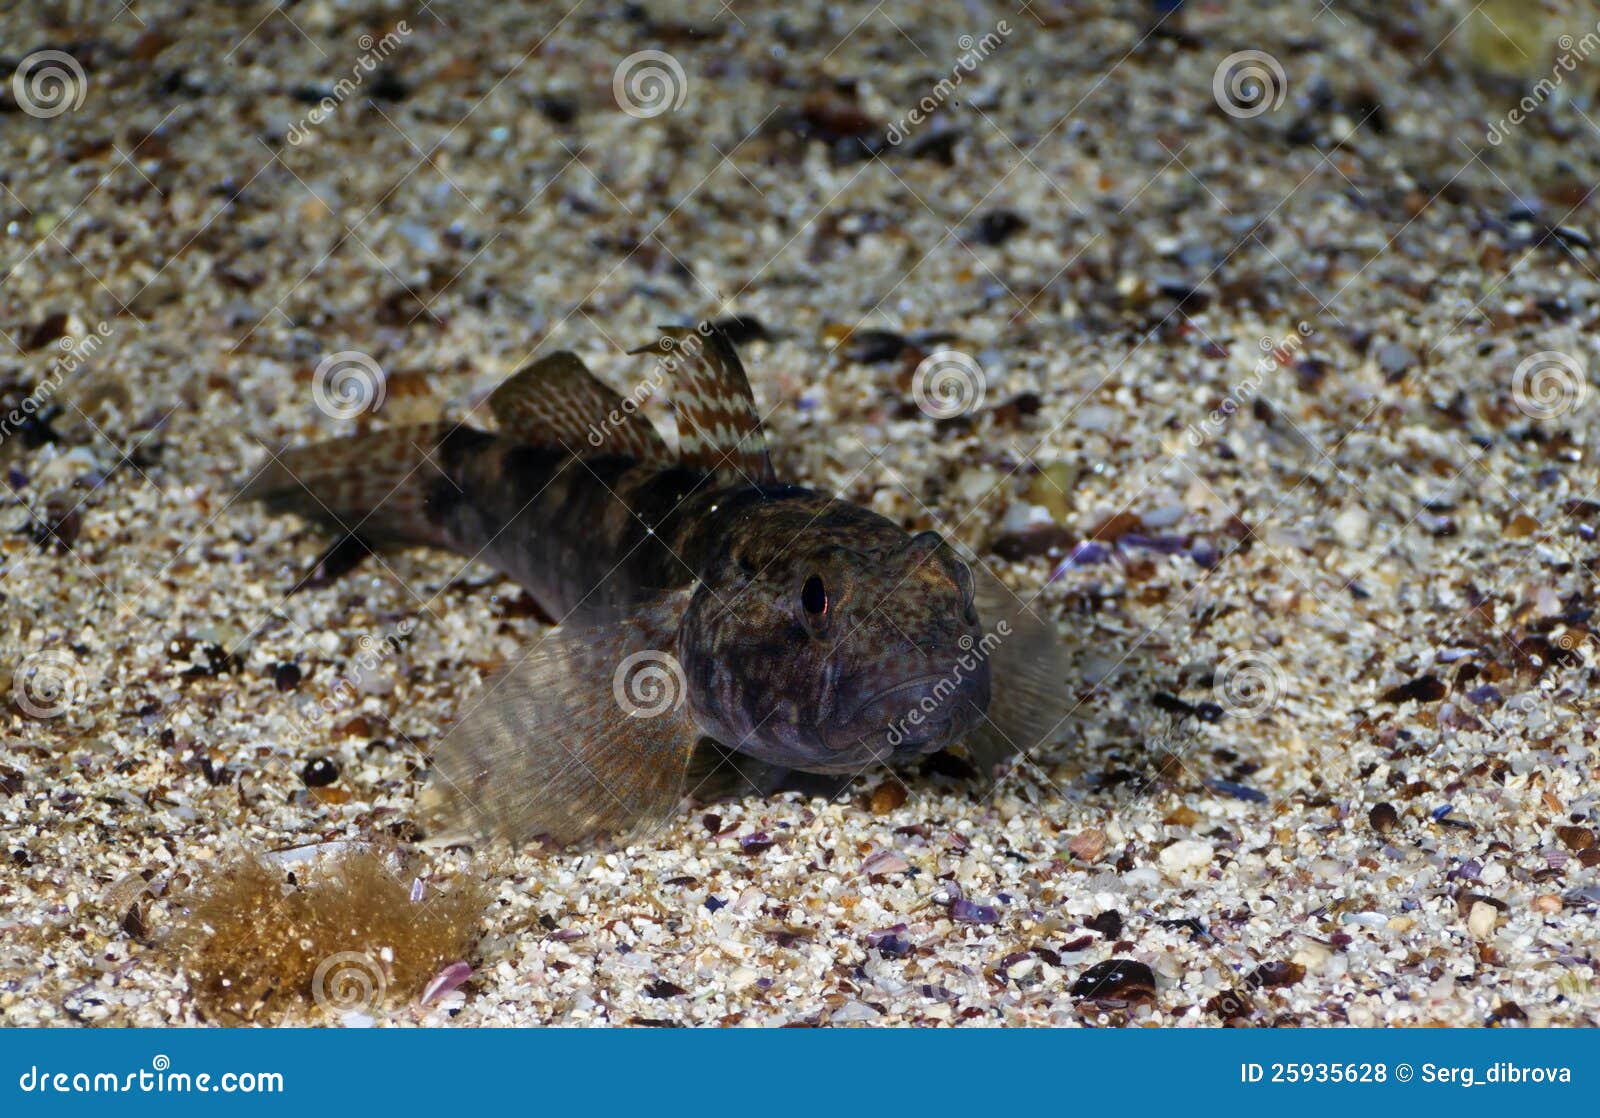 Monkey goby fish stock photo. Image of black, water, bass - 25935628